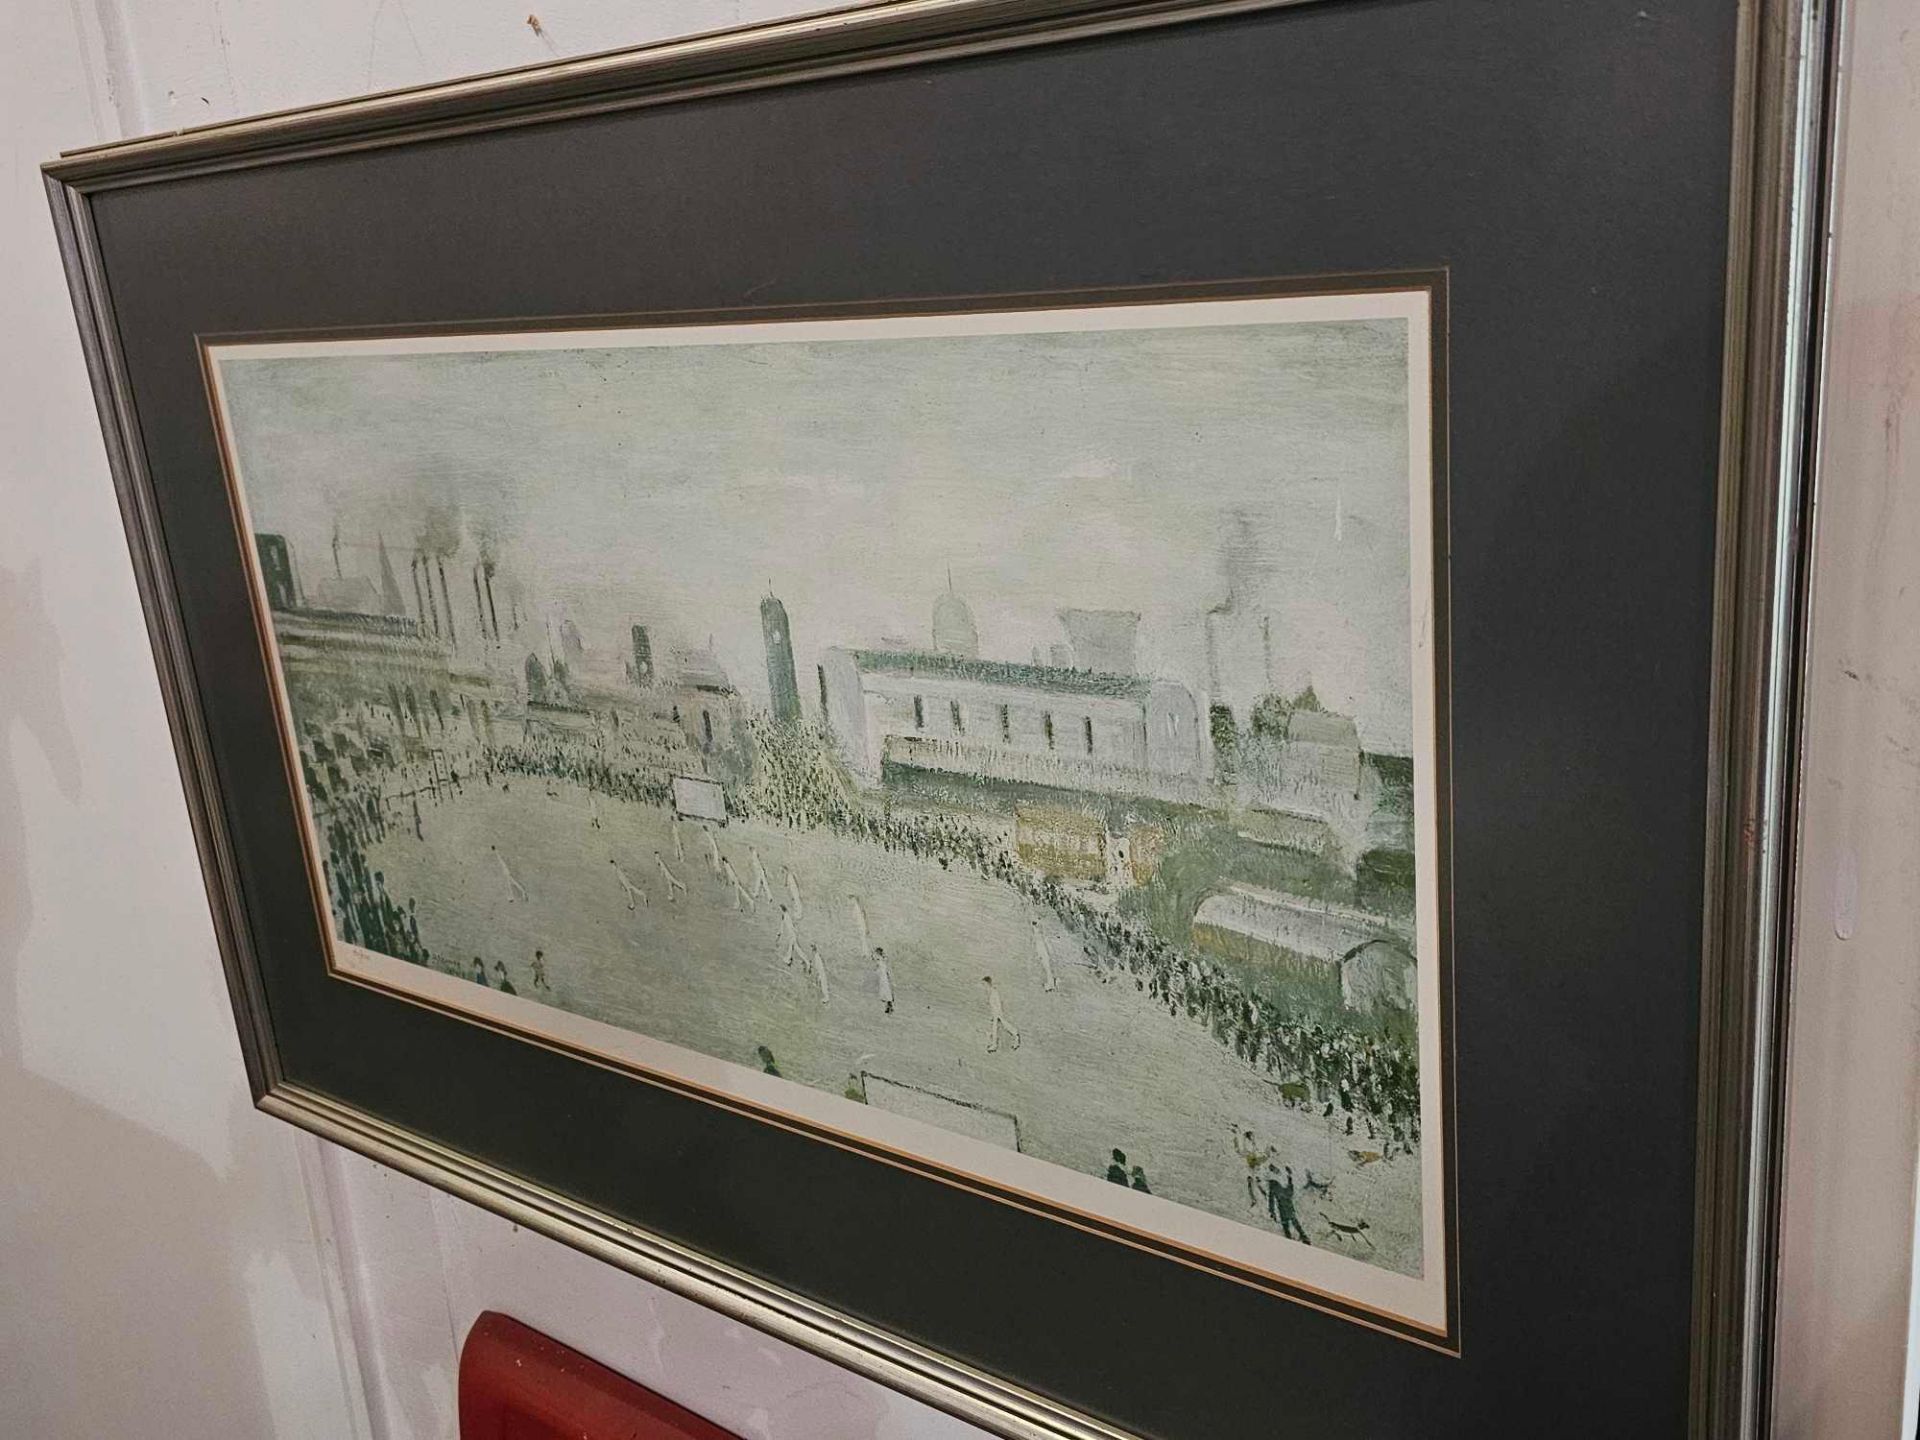 Limited Edition framed print The Cricket Match after  Laurence Stephen Lowry, R.A. (1887-1976) - Image 2 of 5